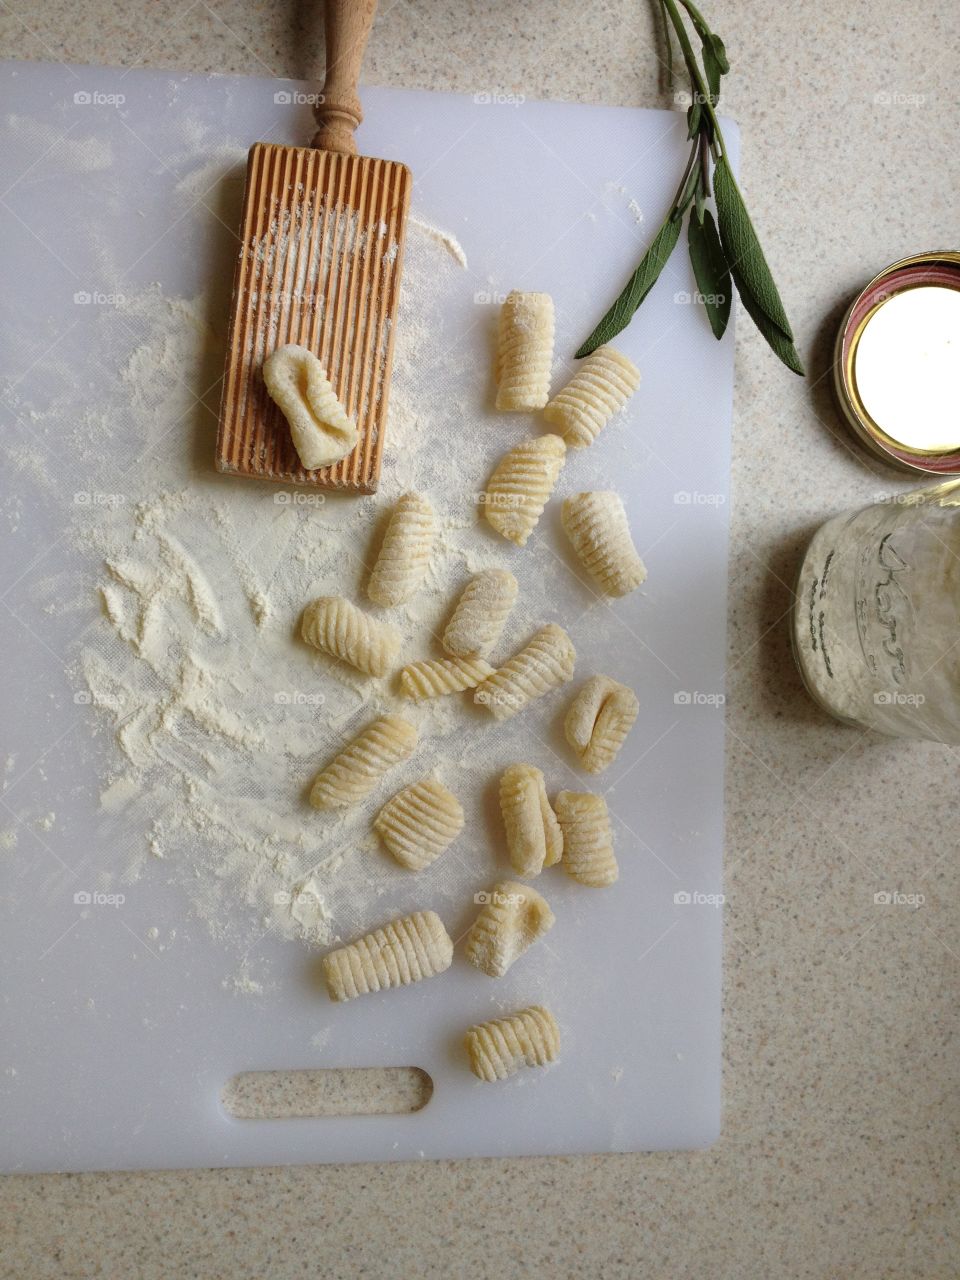 Making homemade gnocchi. Dropping them into a butter sage sauce afterwards. Yumm!